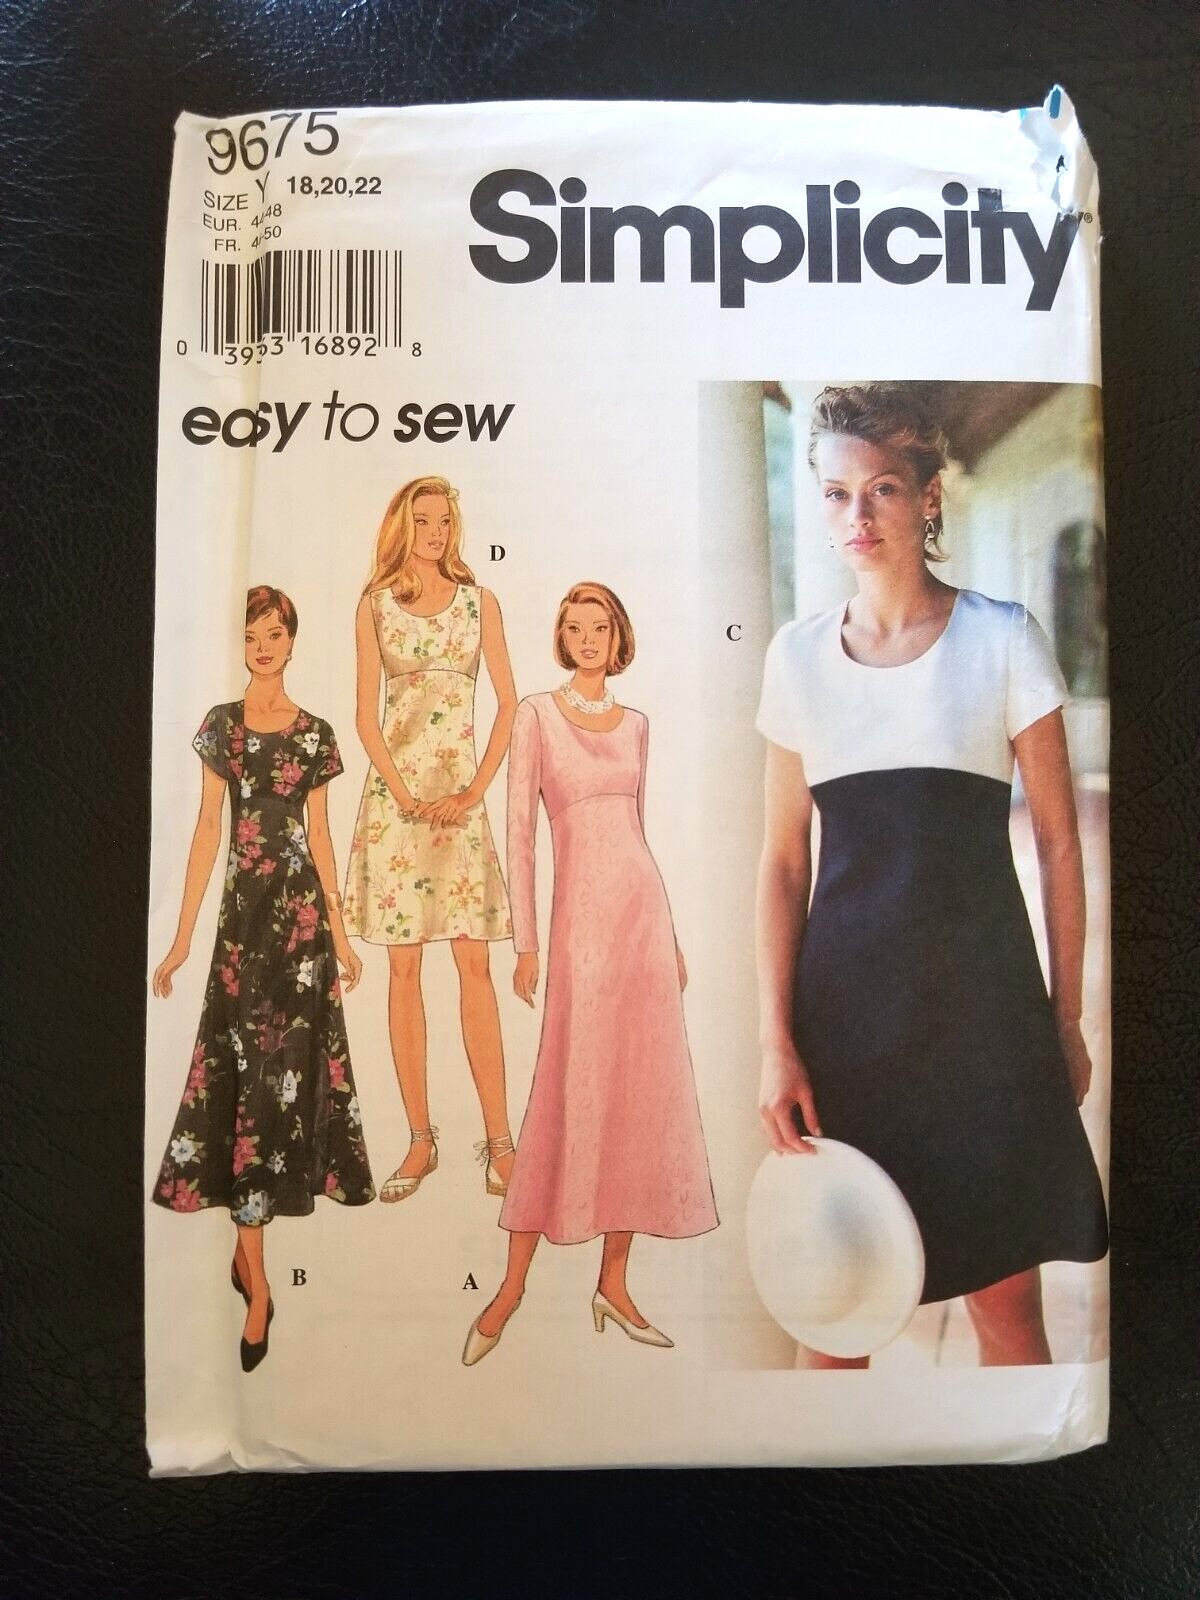 Simplicity 9675 Size Y 18-20-22 Sewing Pattern UNCUT Formal Dress Length Options